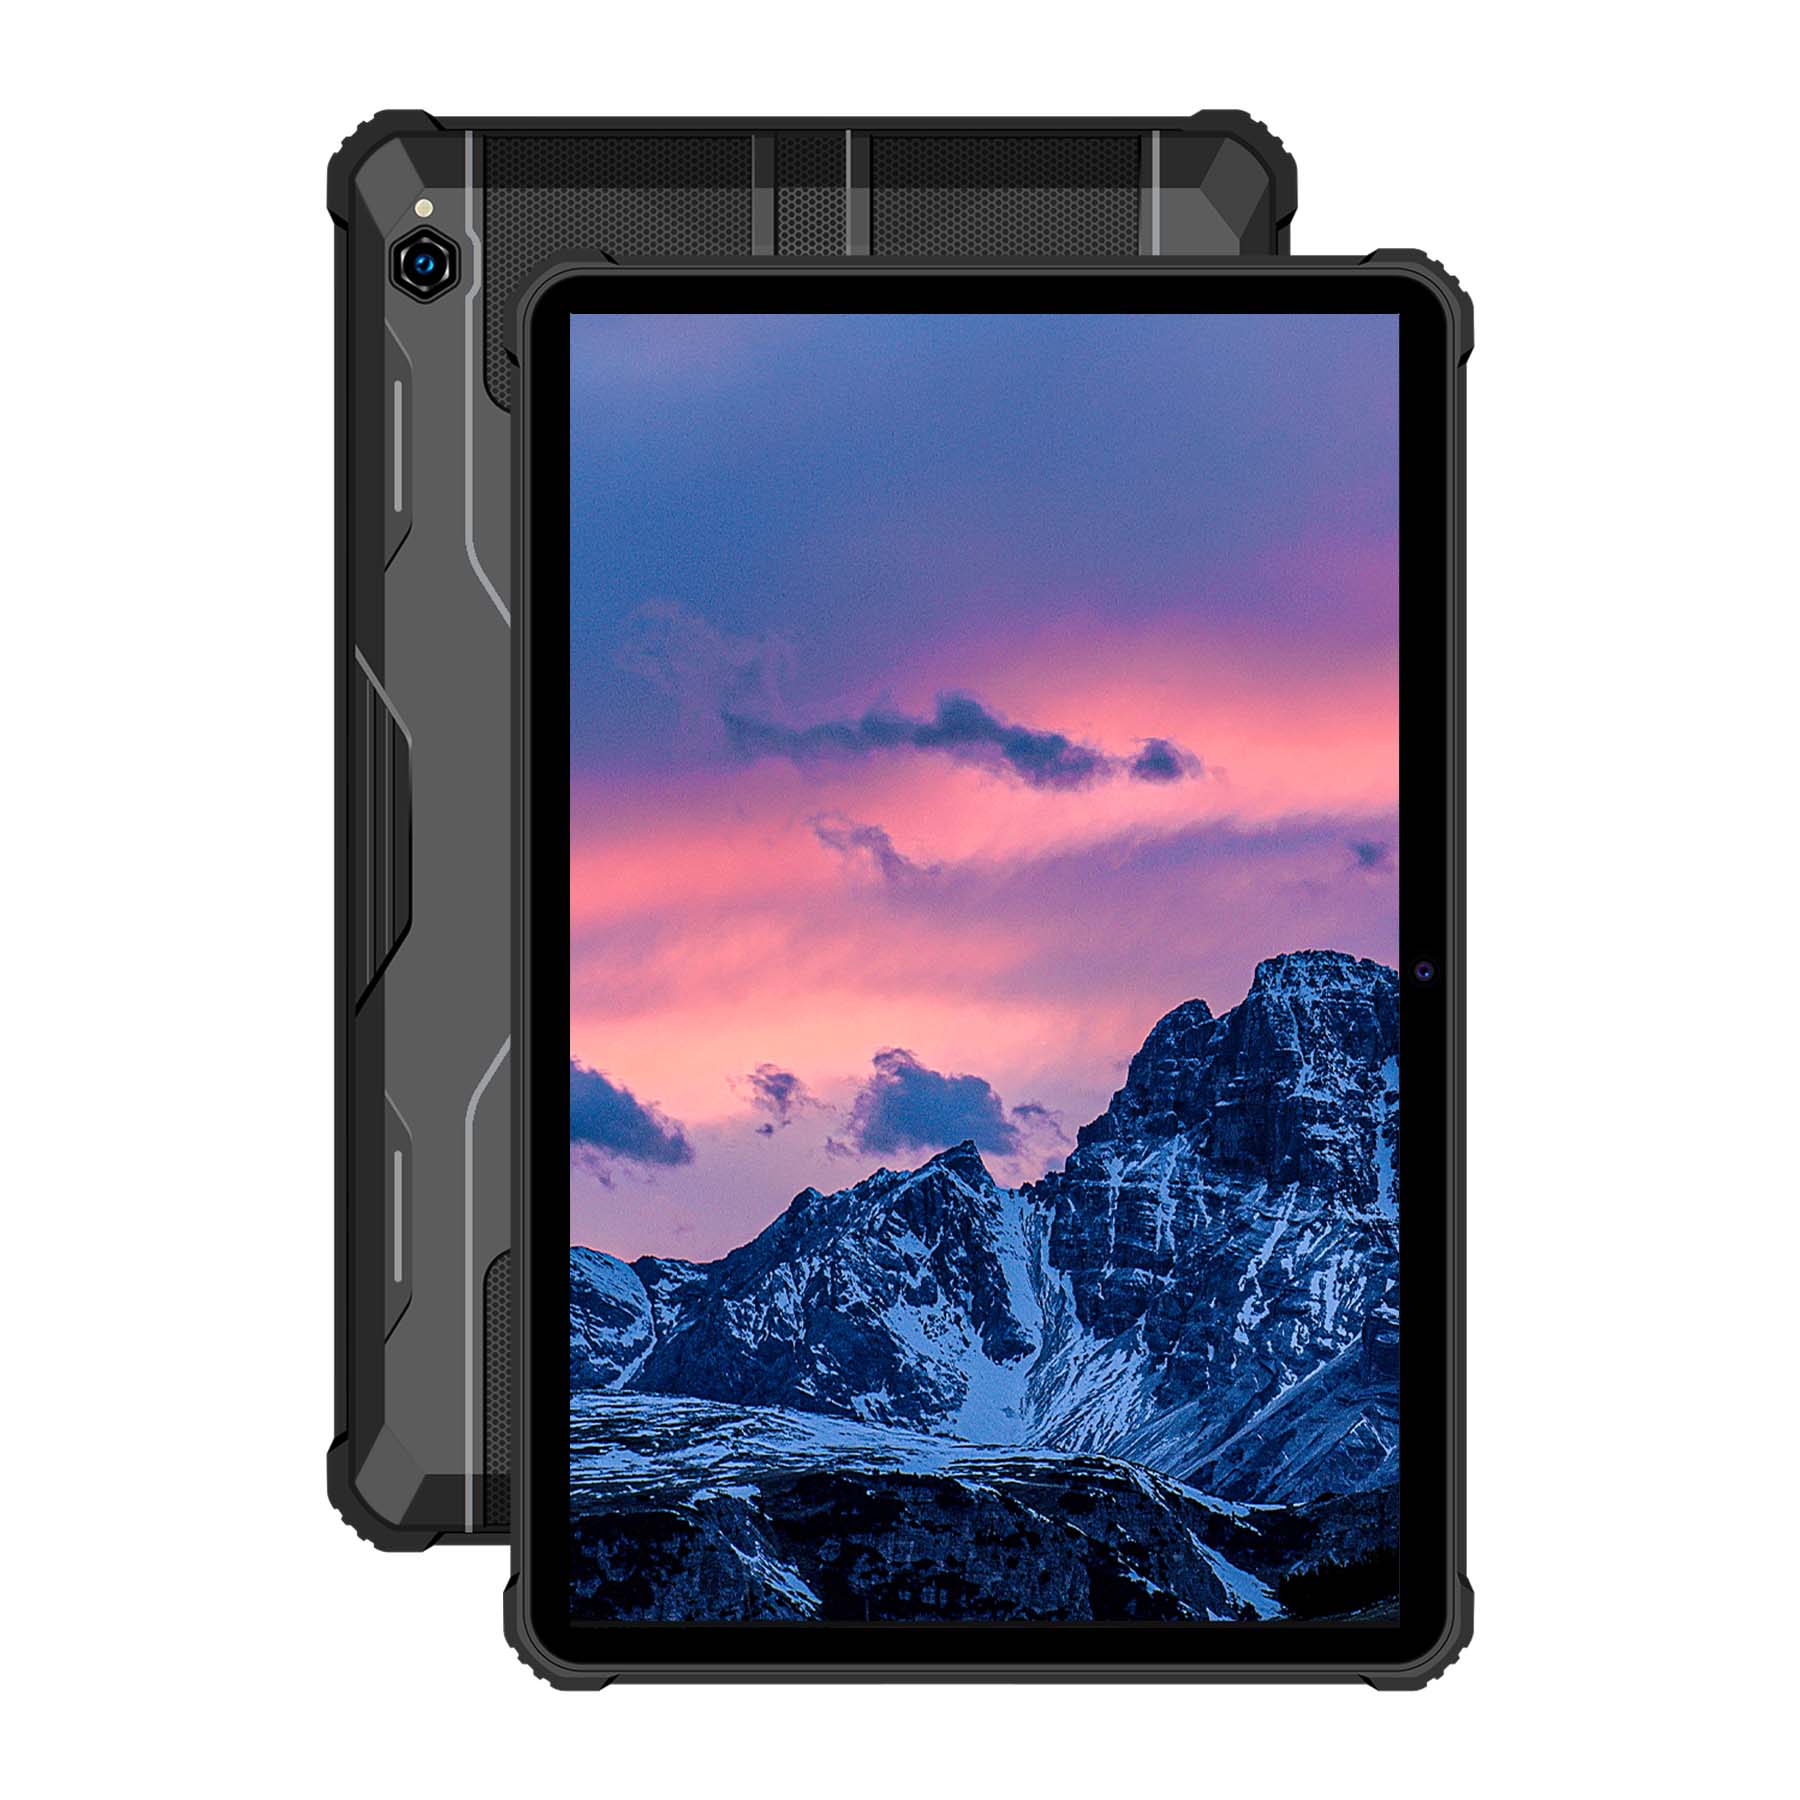 Find OUKITEL RT1 Helio P22 MT8768WA Octa Core 4GB RAM 64GB ROM 4G LTE 10.1 Inch Androd 11 Fingerprint ID Rugged Tablet for Sale on Gipsybee.com with cryptocurrencies